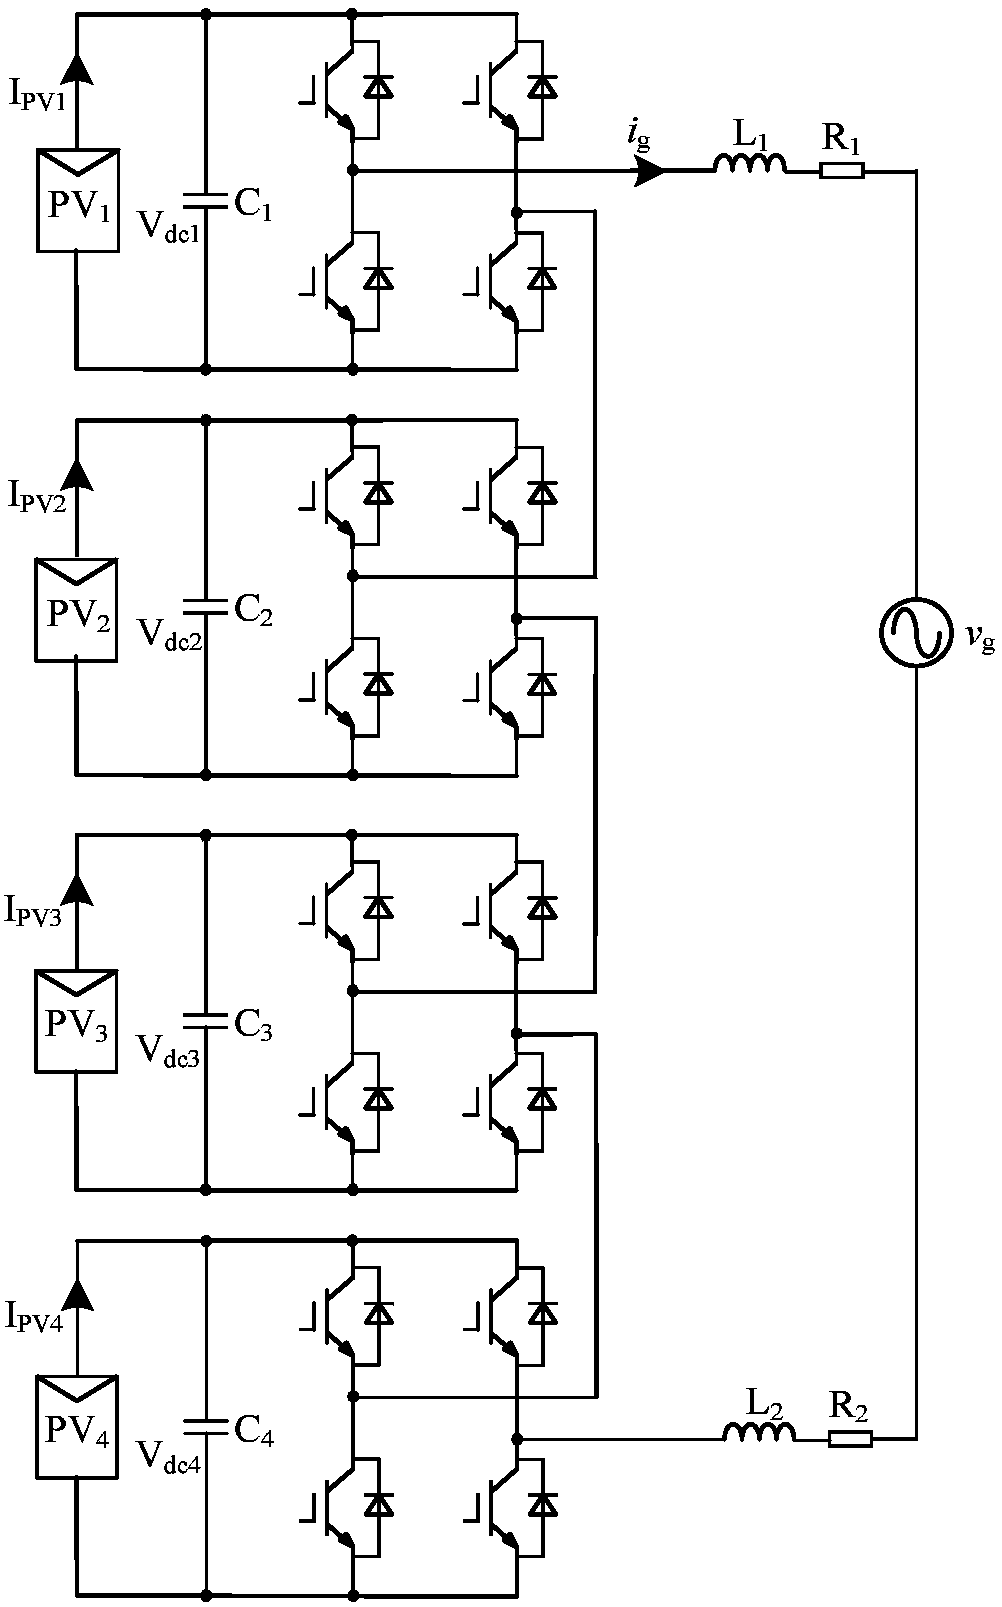 Control method for expanding the stable operating range of cascaded h-bridge photovoltaic grid-connected inverters